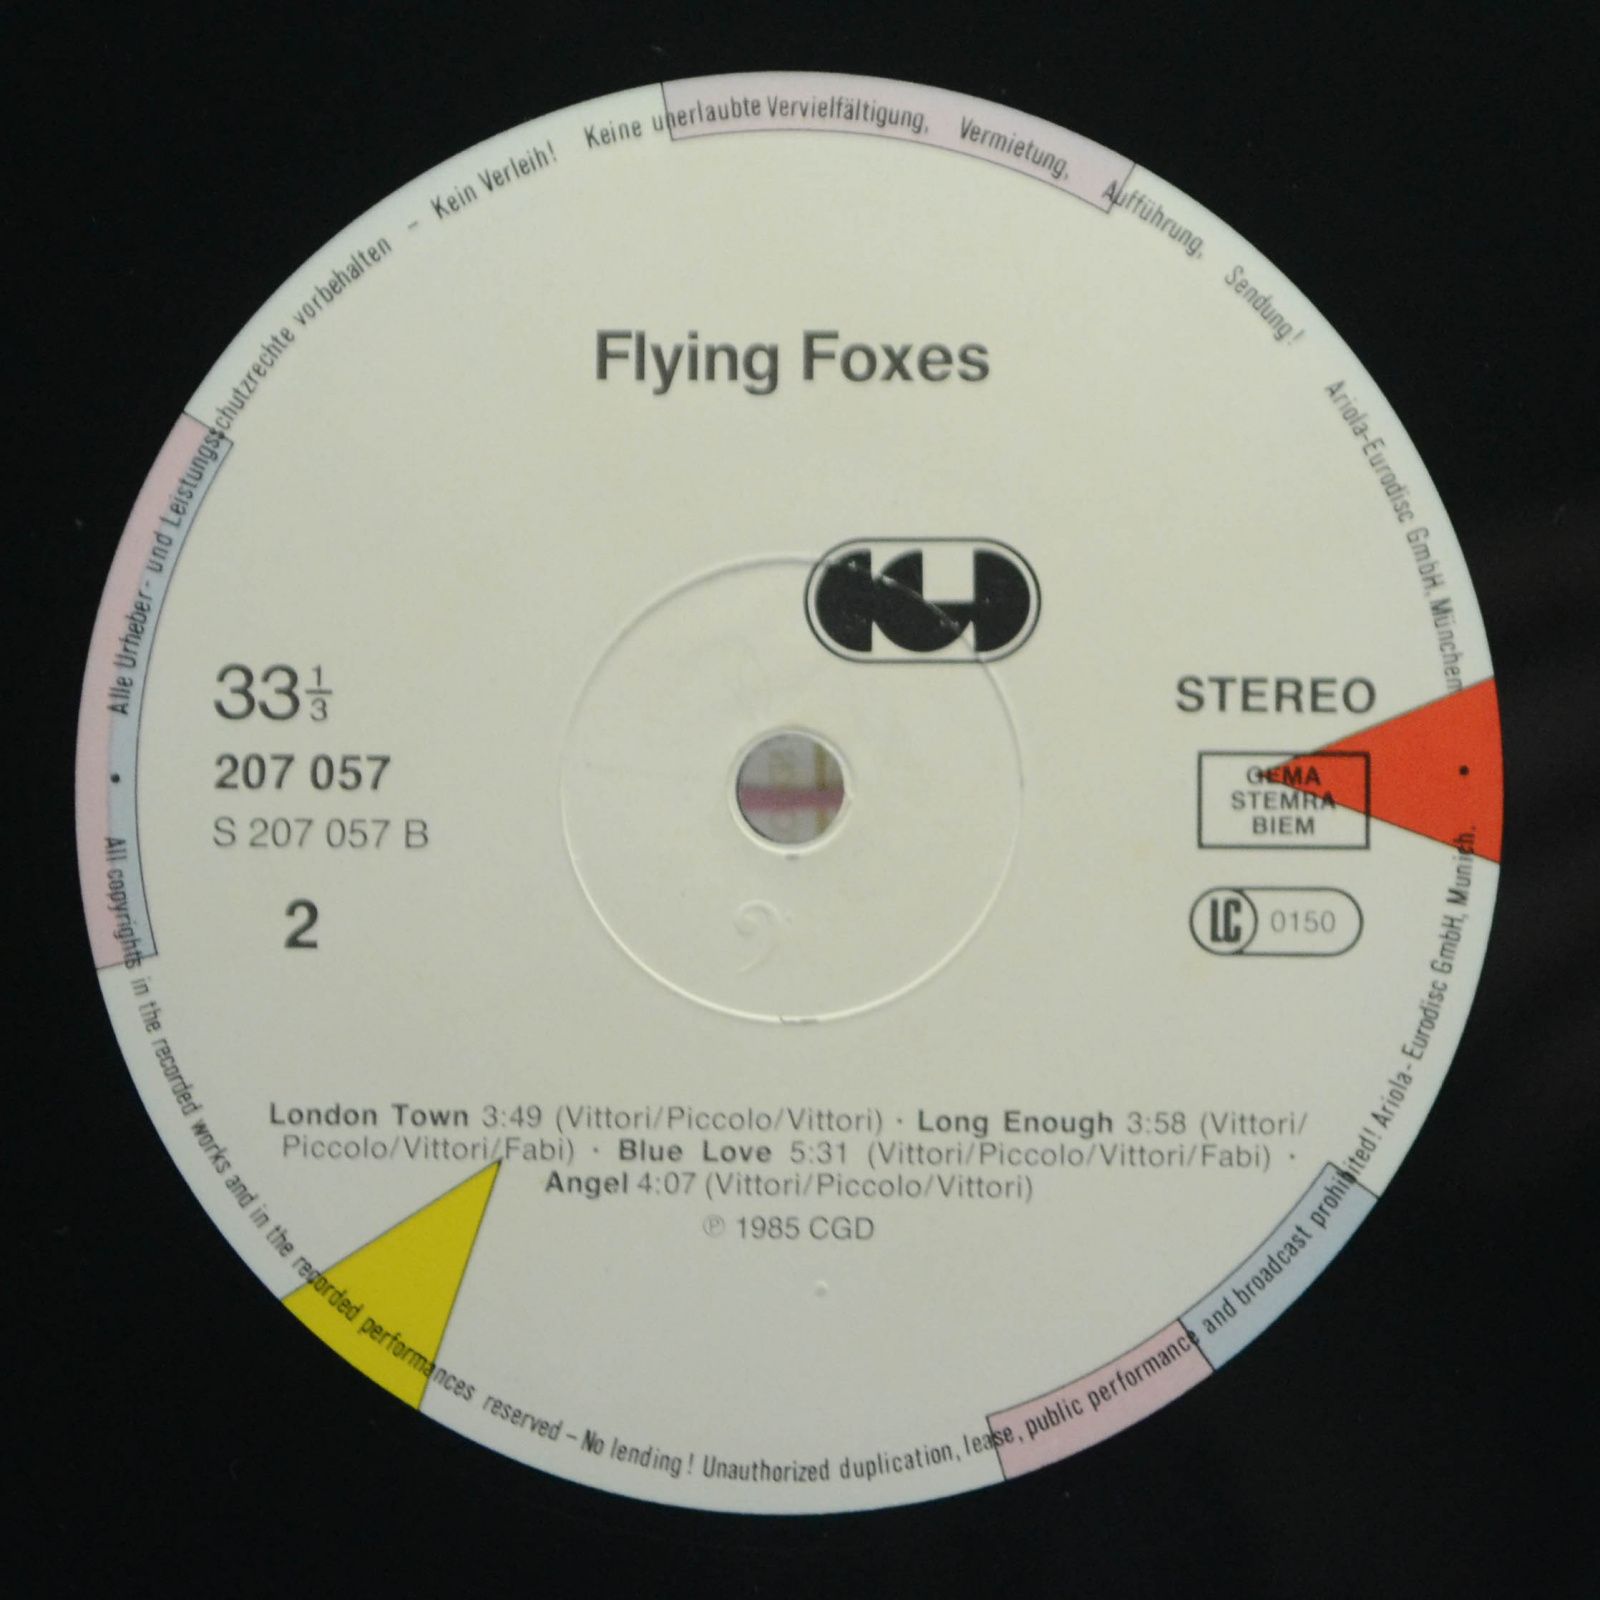 Flying Foxes — Flying Foxes, 1985